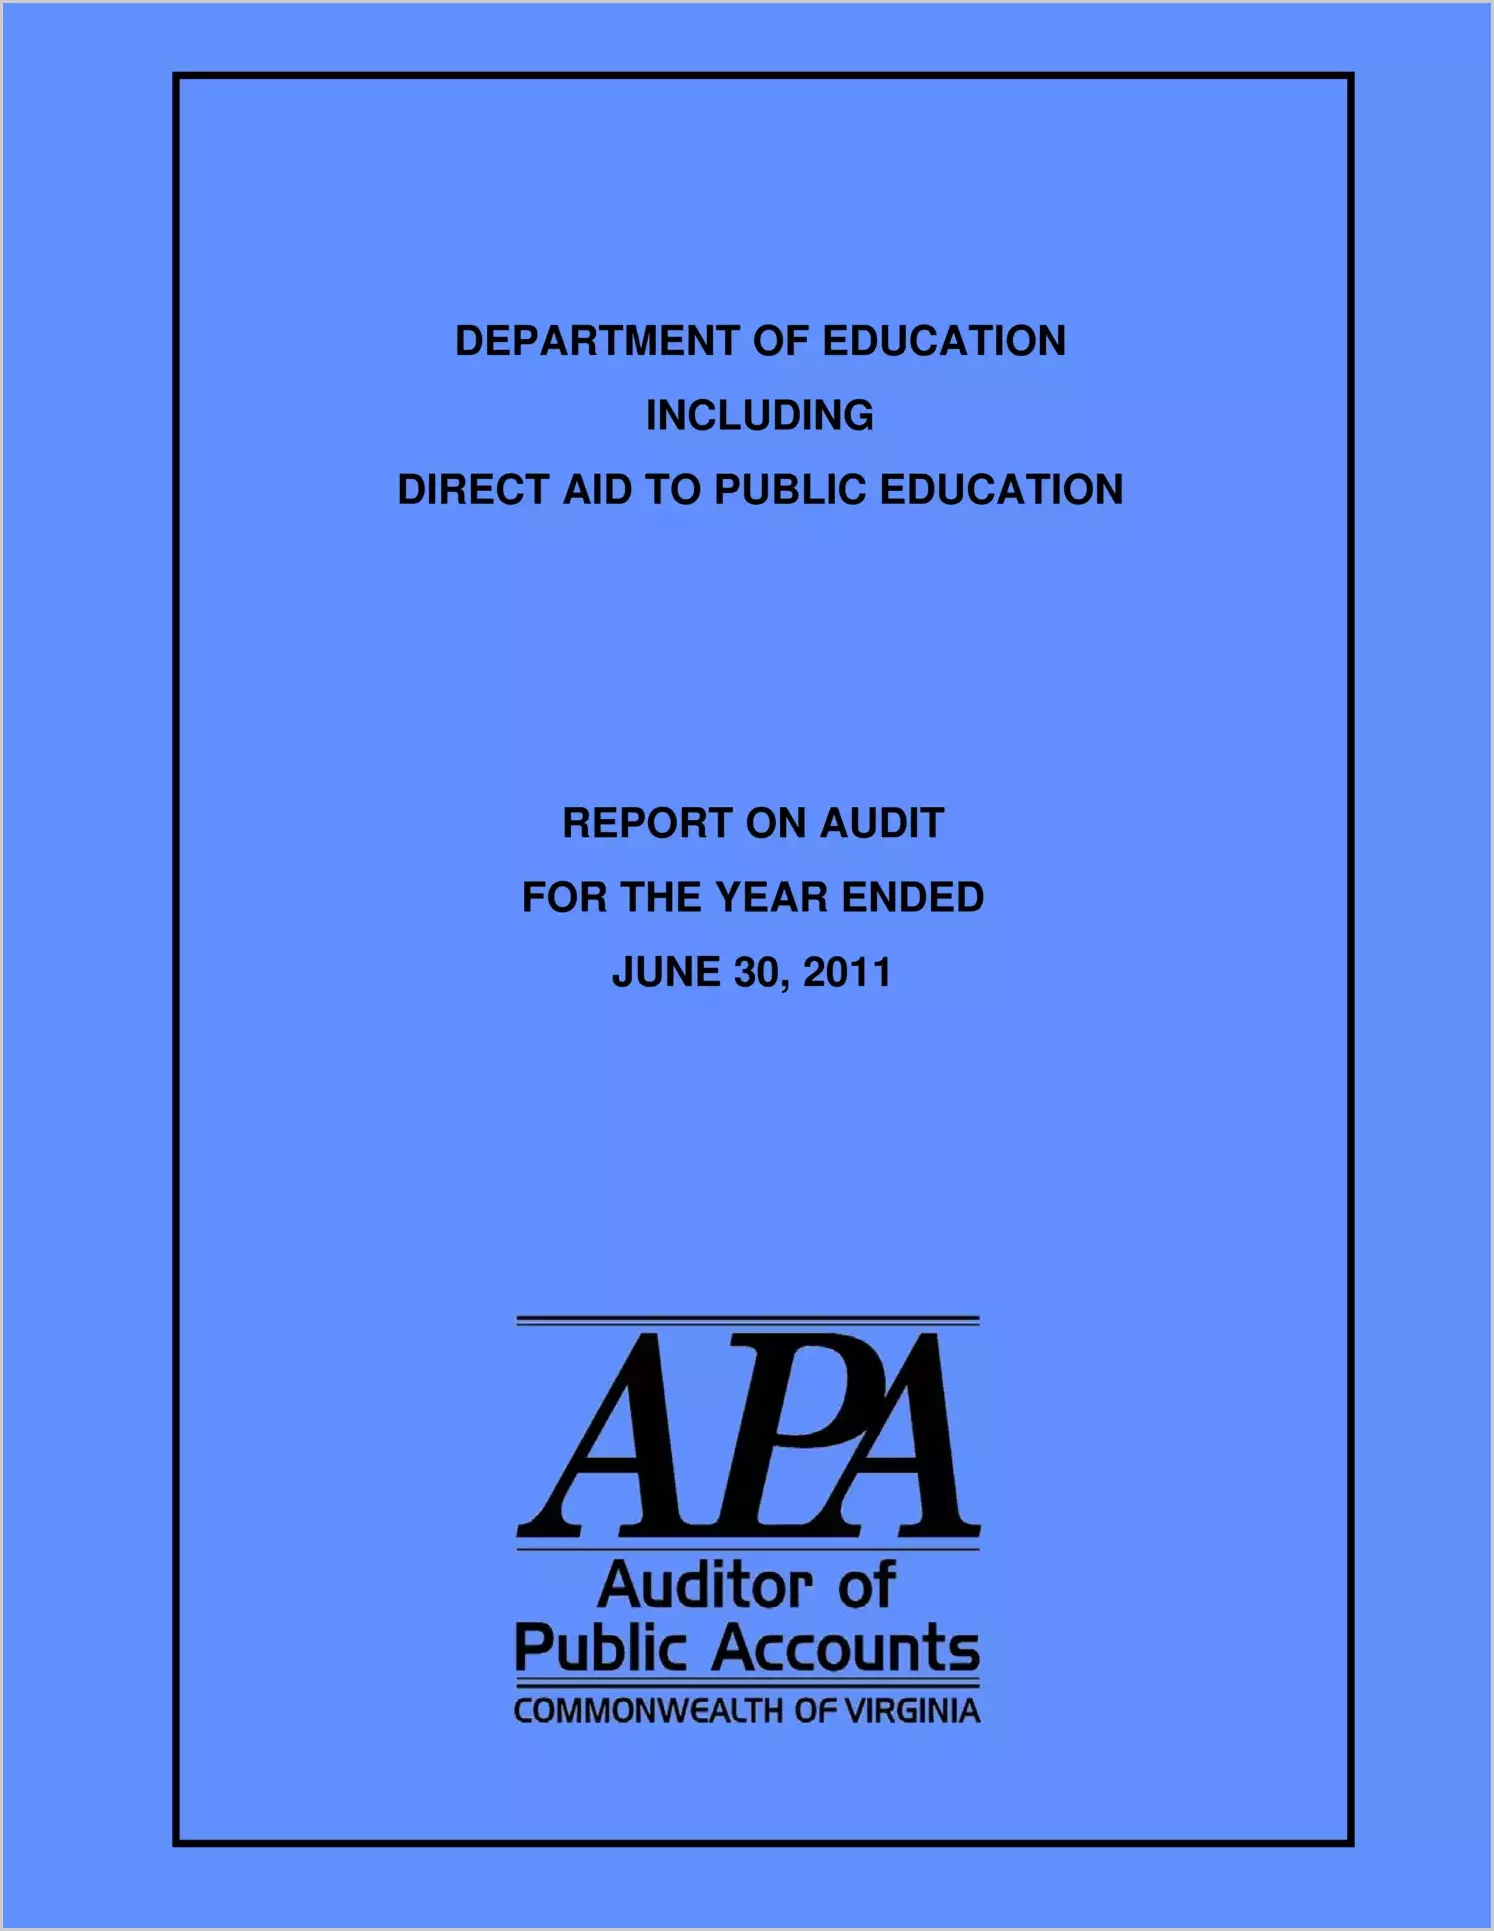 Department of Education Including Direct Aid to Public Education for the year ended June 30, 2011